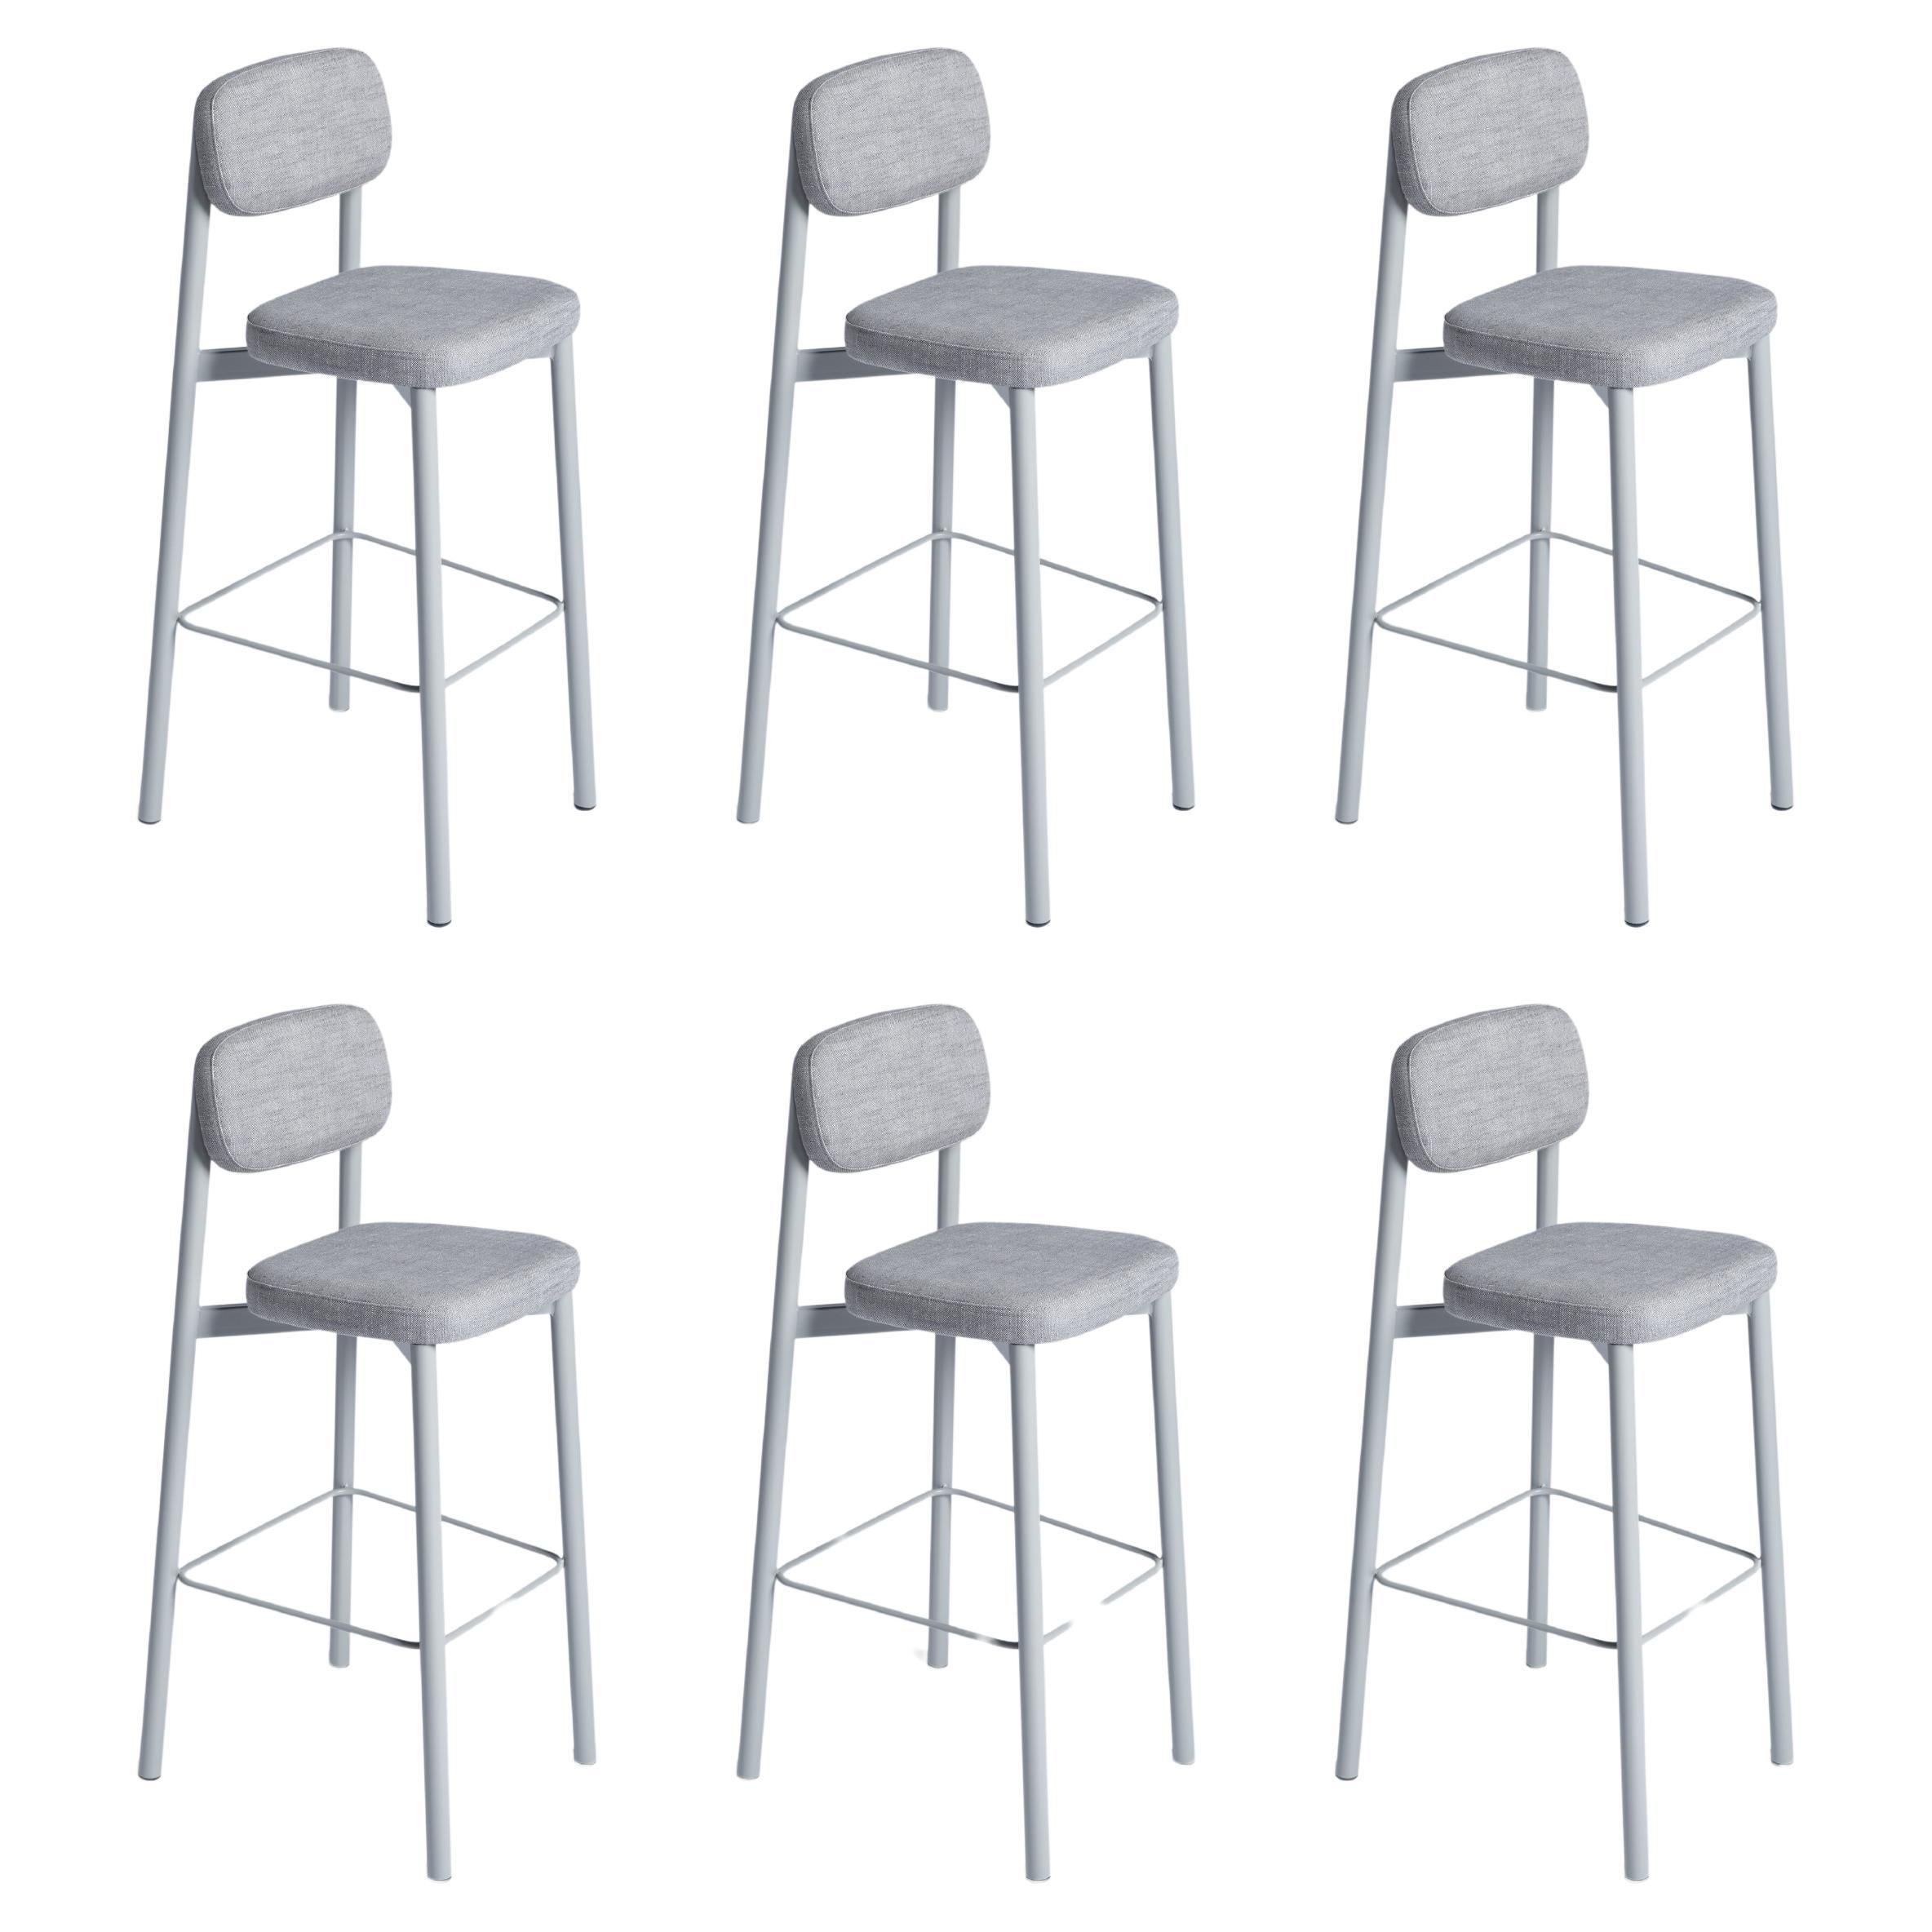 Set of 6 Grey Residence 75 Counter Chairs by Kann Design